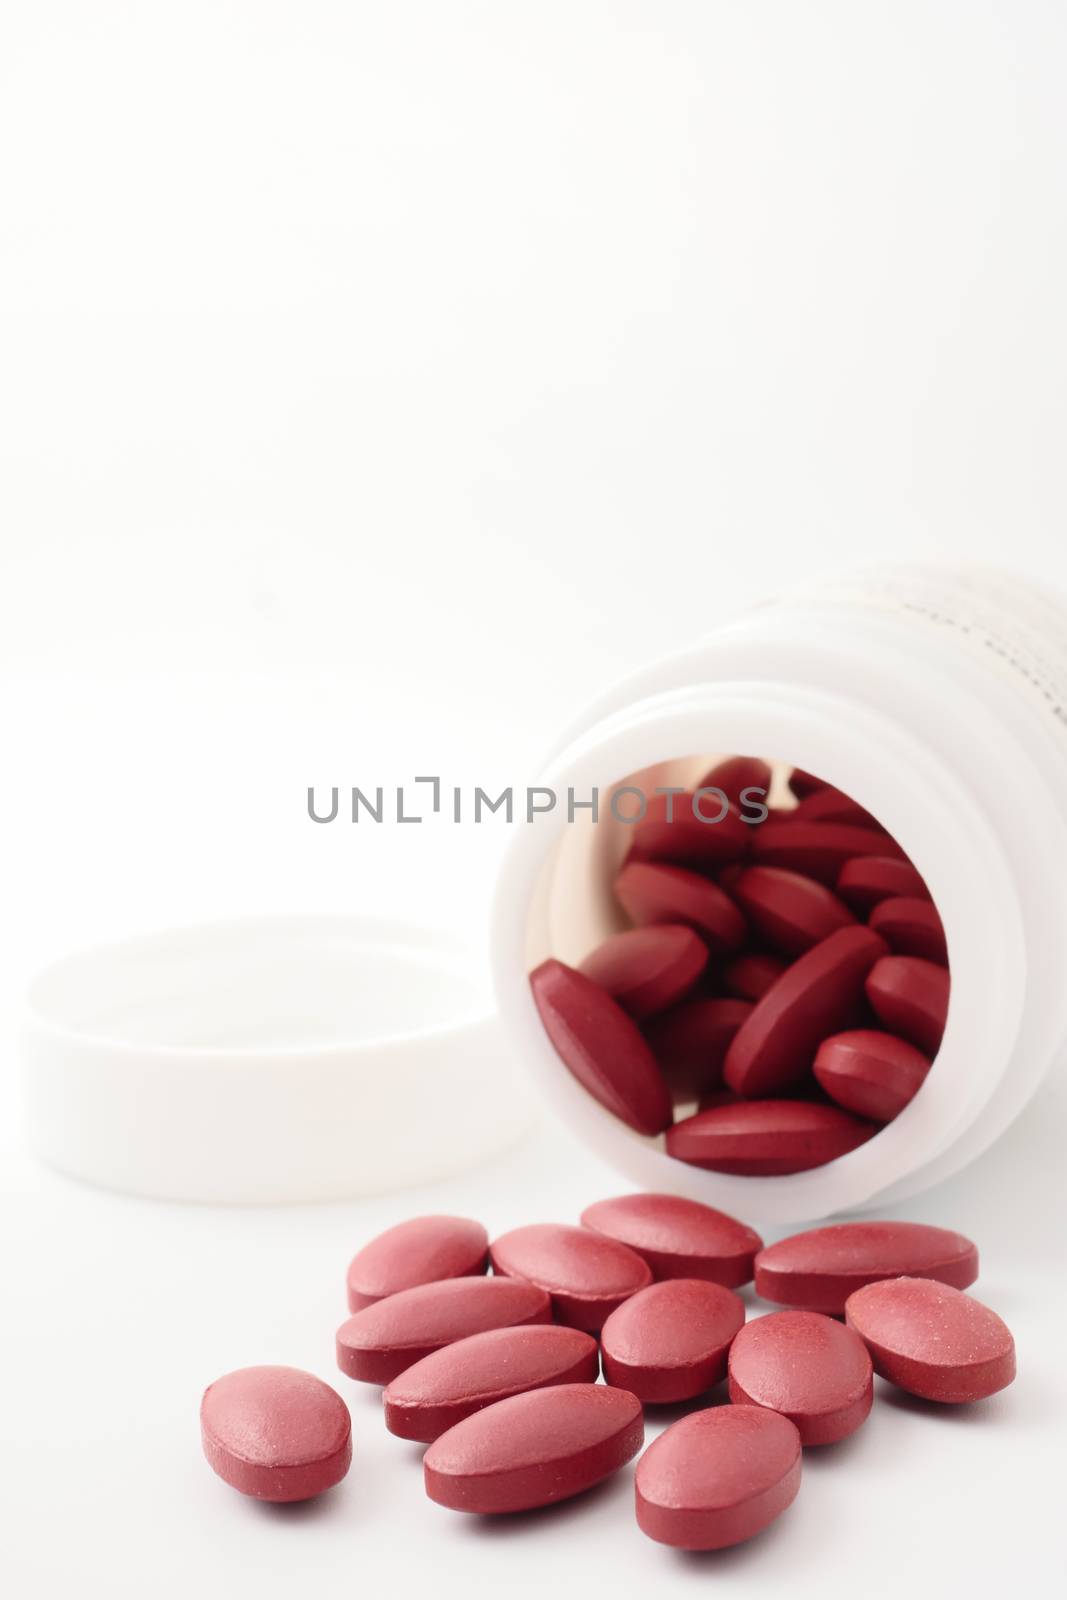 Red vitamin pills pouring out of the bottle on white background. by ronnarong